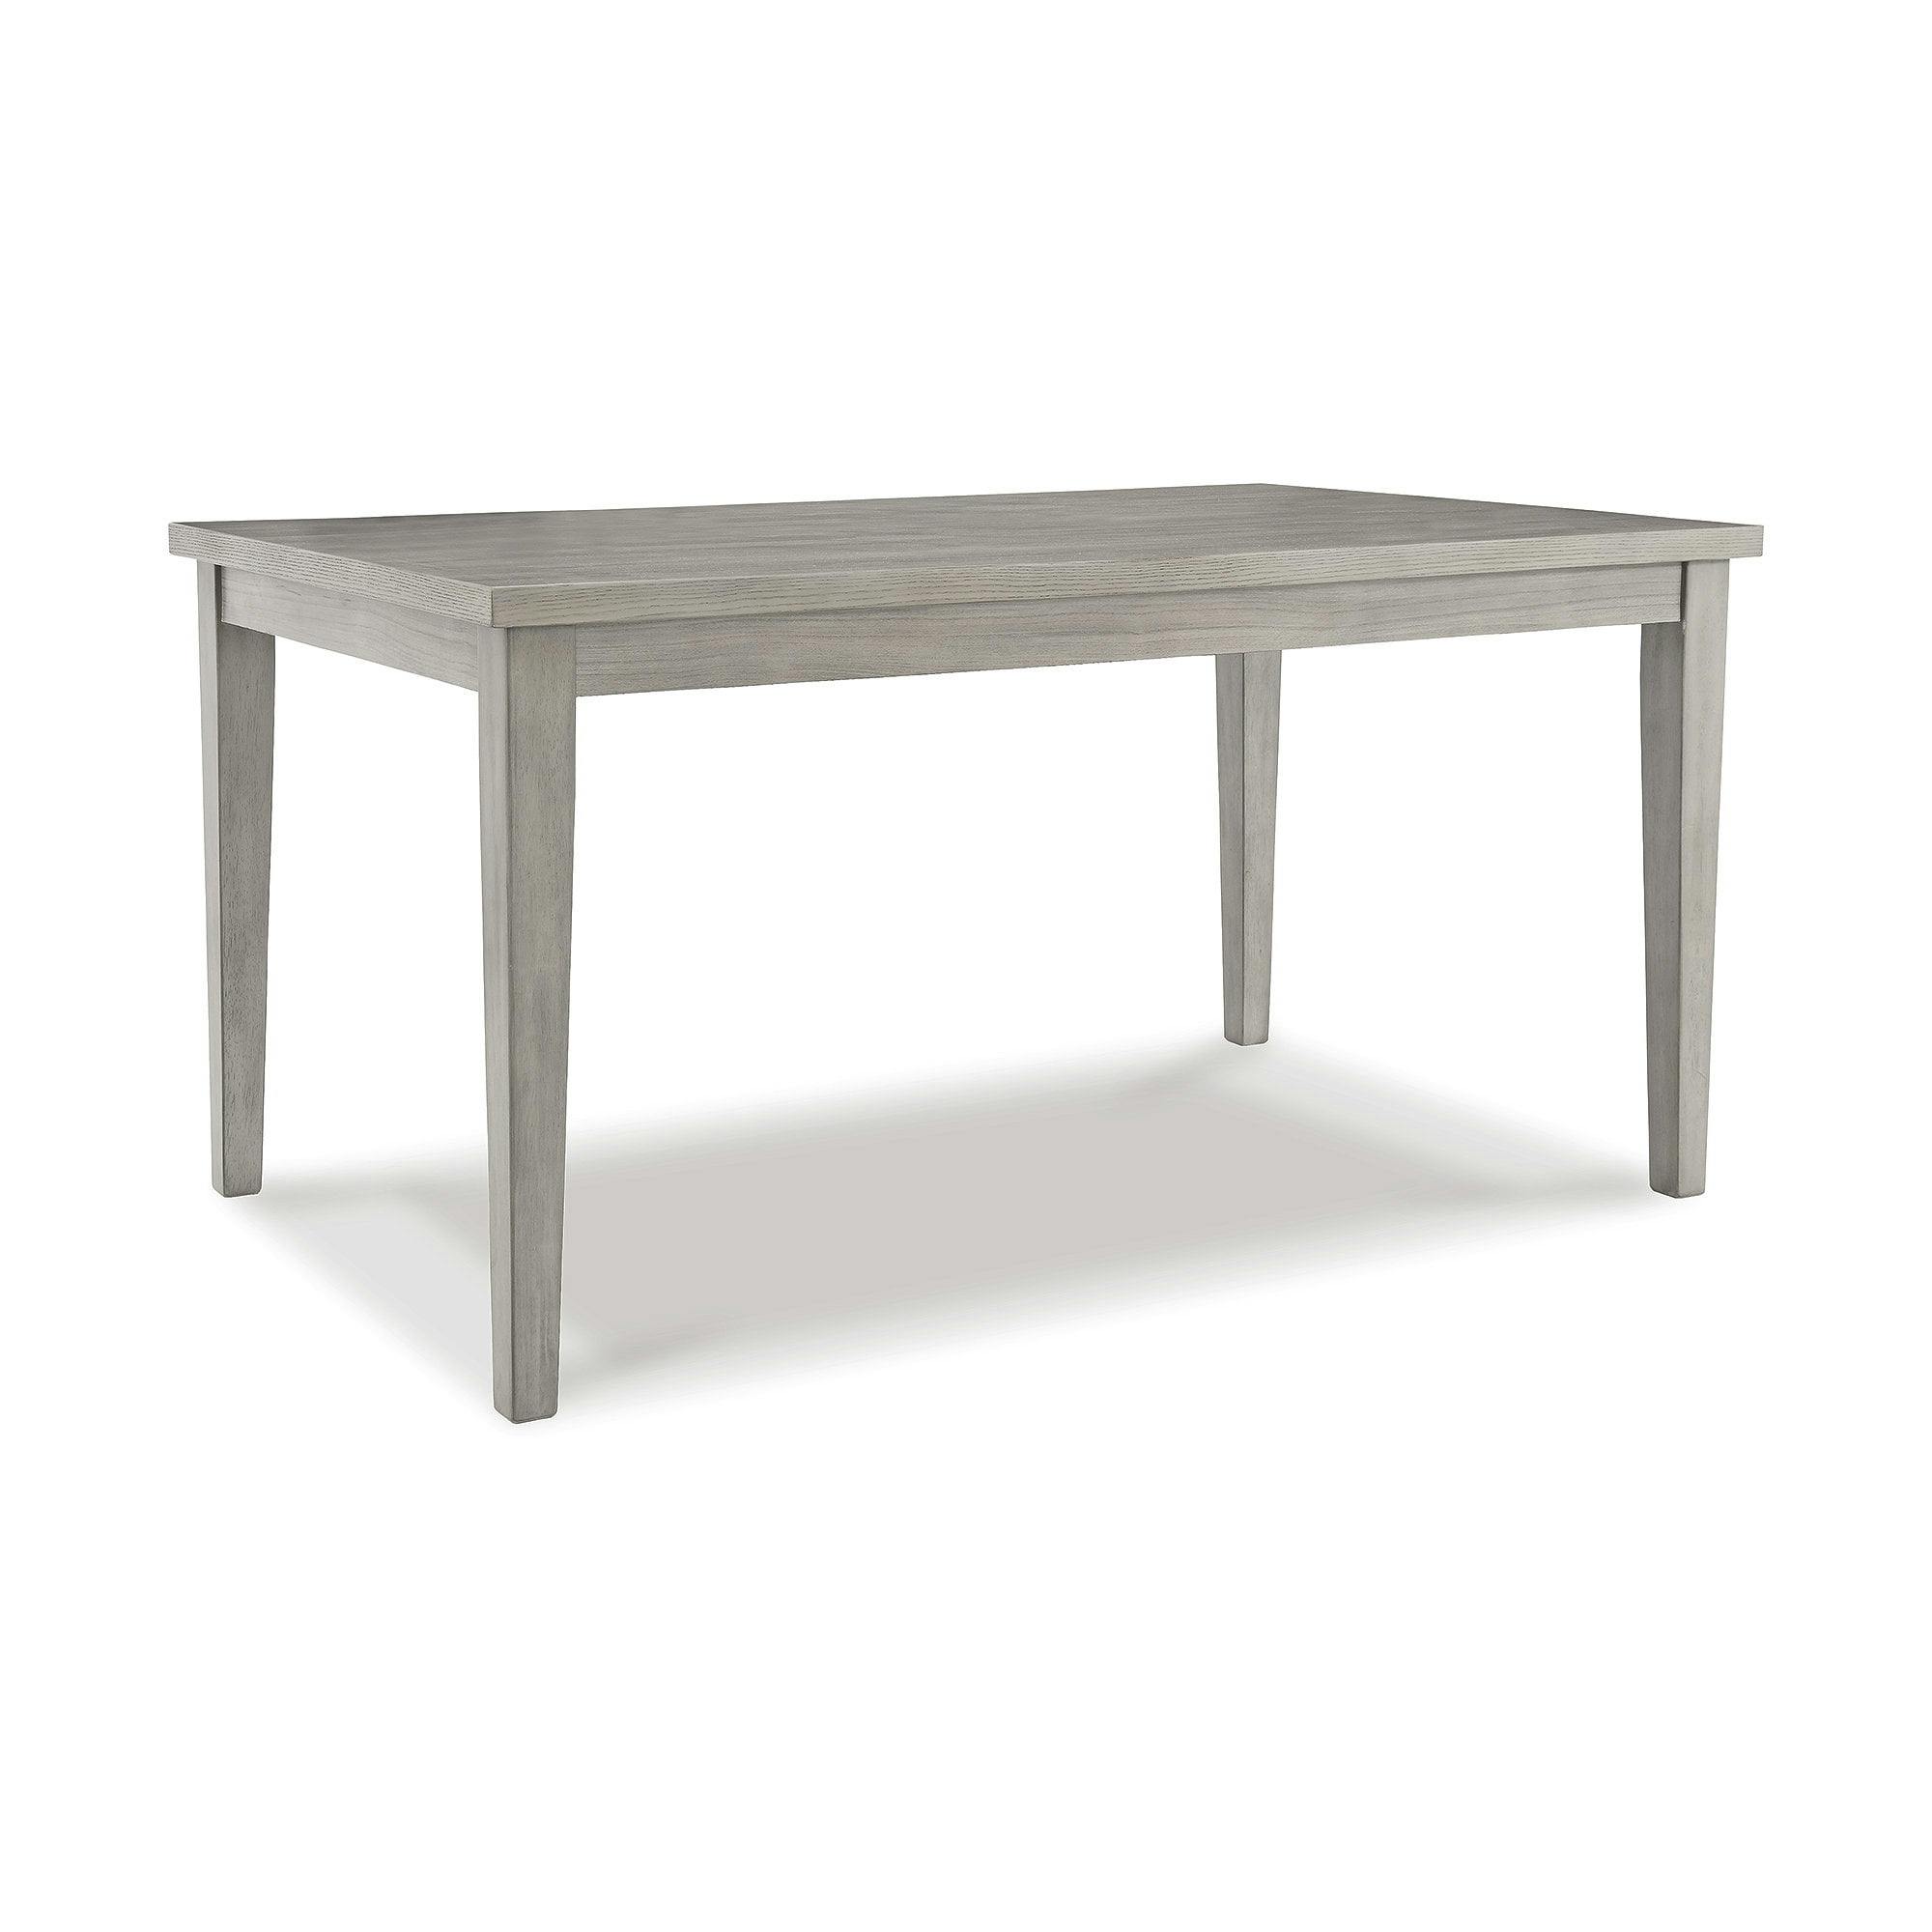 Transitional Reclaimed Wood Extendable Dining Table in Gray